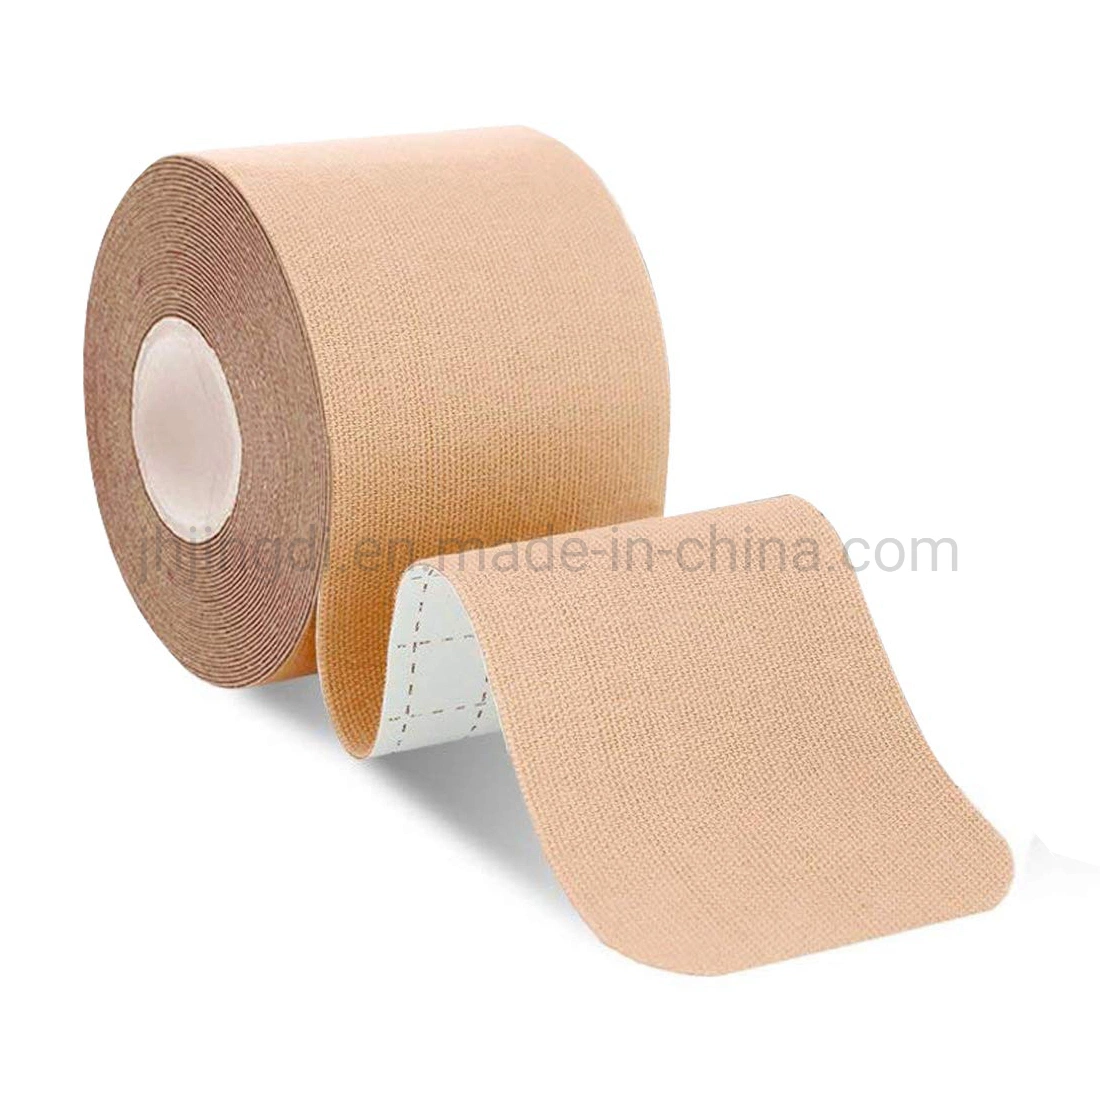 Kinesiology Tape Sports Tape/ Elastic Adhesive Muscle Bandage Care Physio Strain Injury Supportcle Tape